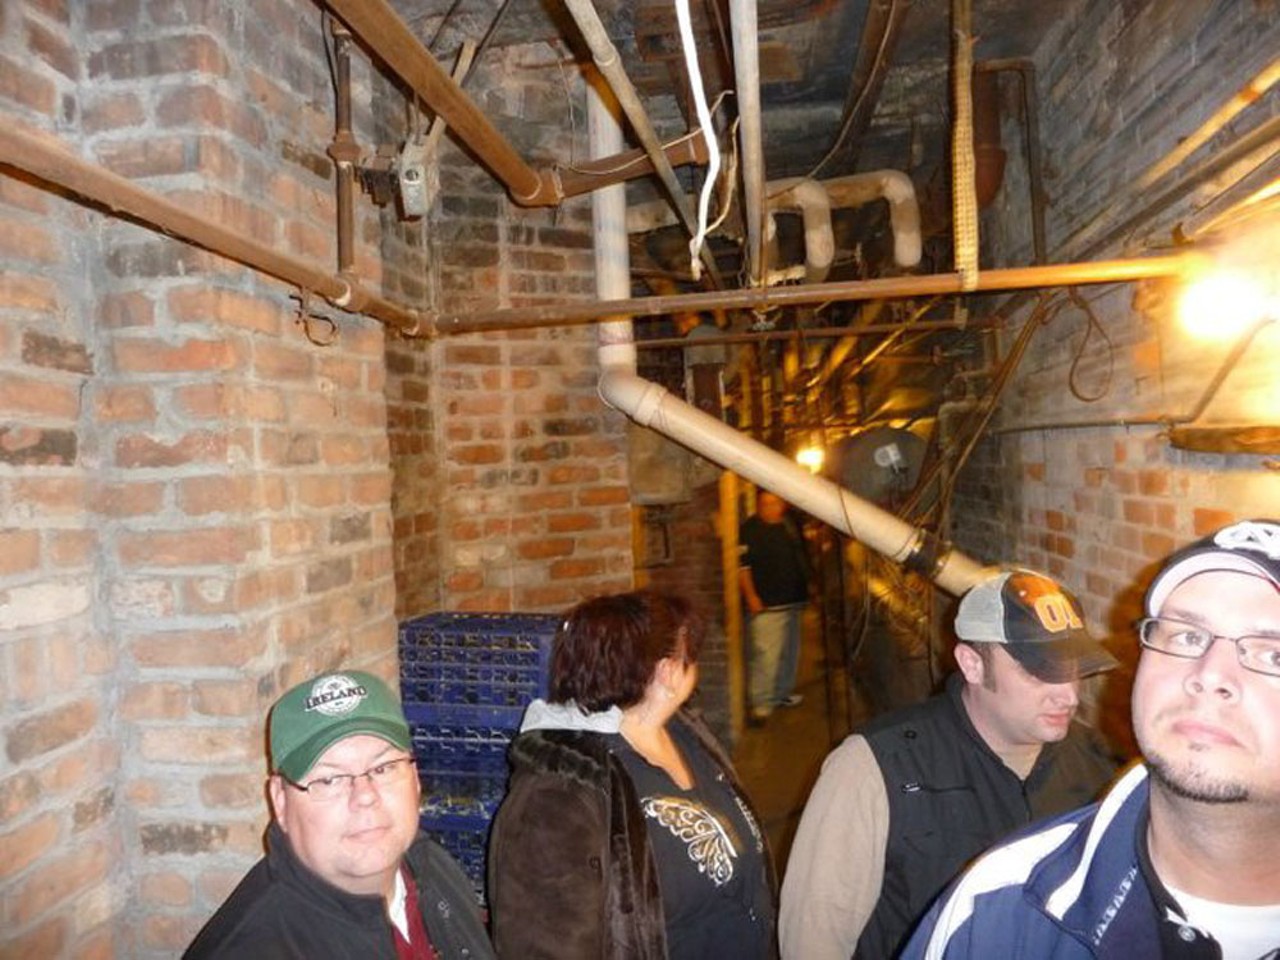 Haunted Detroit Tours
This is your chance to become a ghost hunter in metro Detroit. This 2.5 hour will shuttle you to metro Detroit&#146;s most haunted areas where you&#146;ll hear some history, and use some fancy gadgets like infrared thermometers and EMF detectors. Tickets are $35. www.haunteddetroittours.com